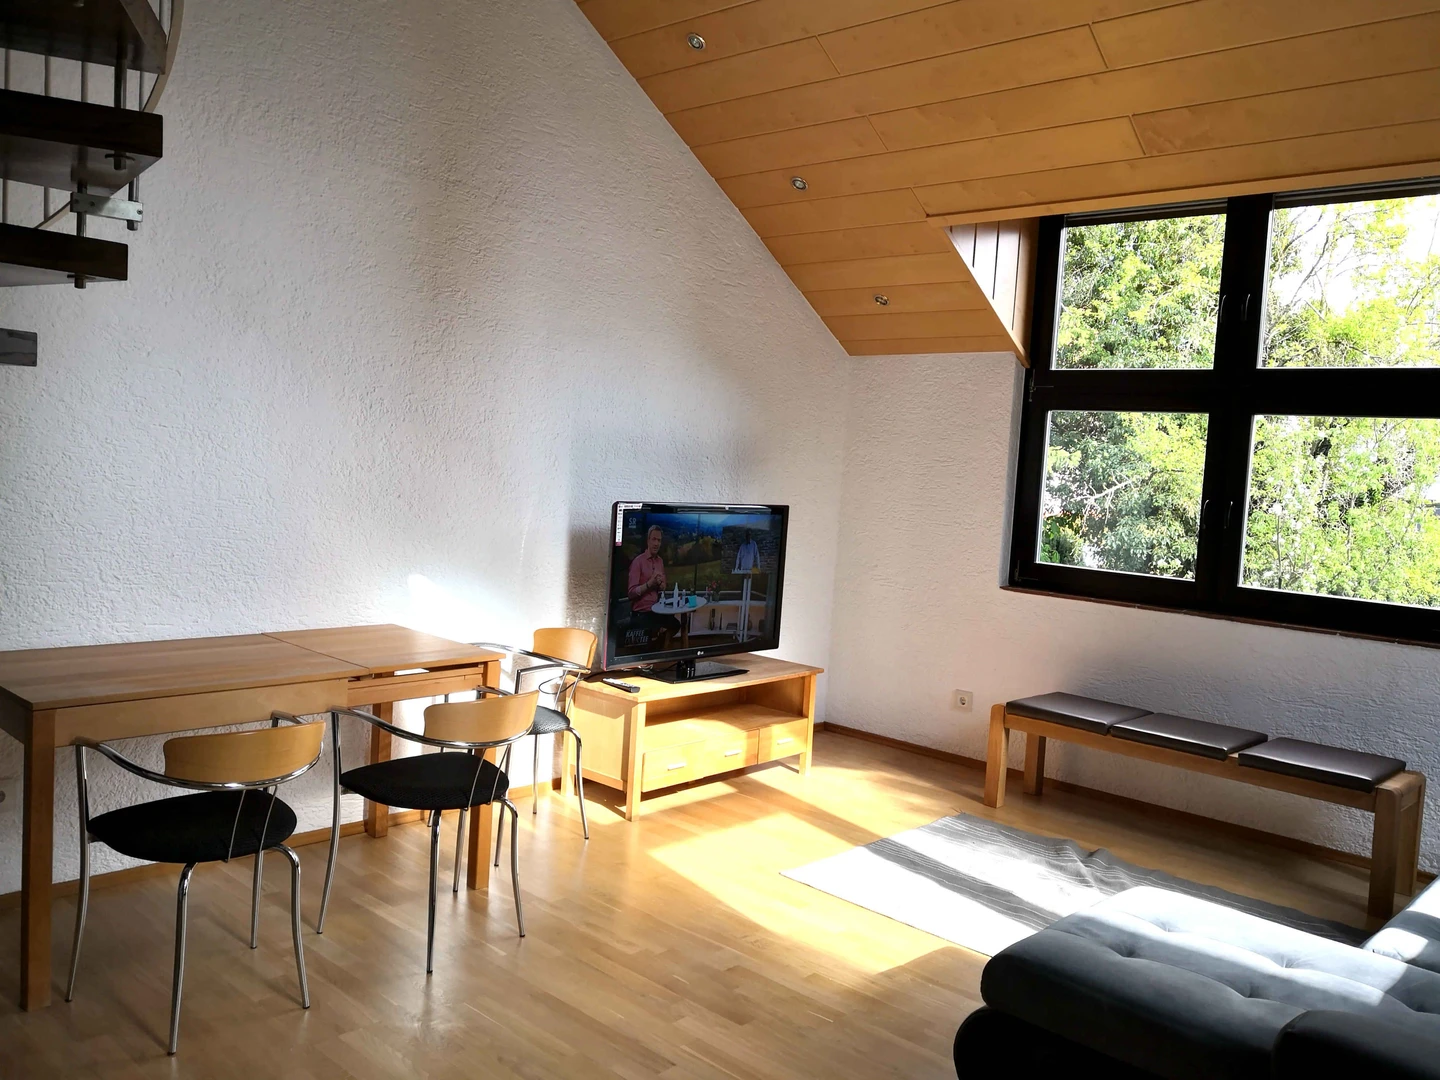 Room for rent in a shared flat in Mainz